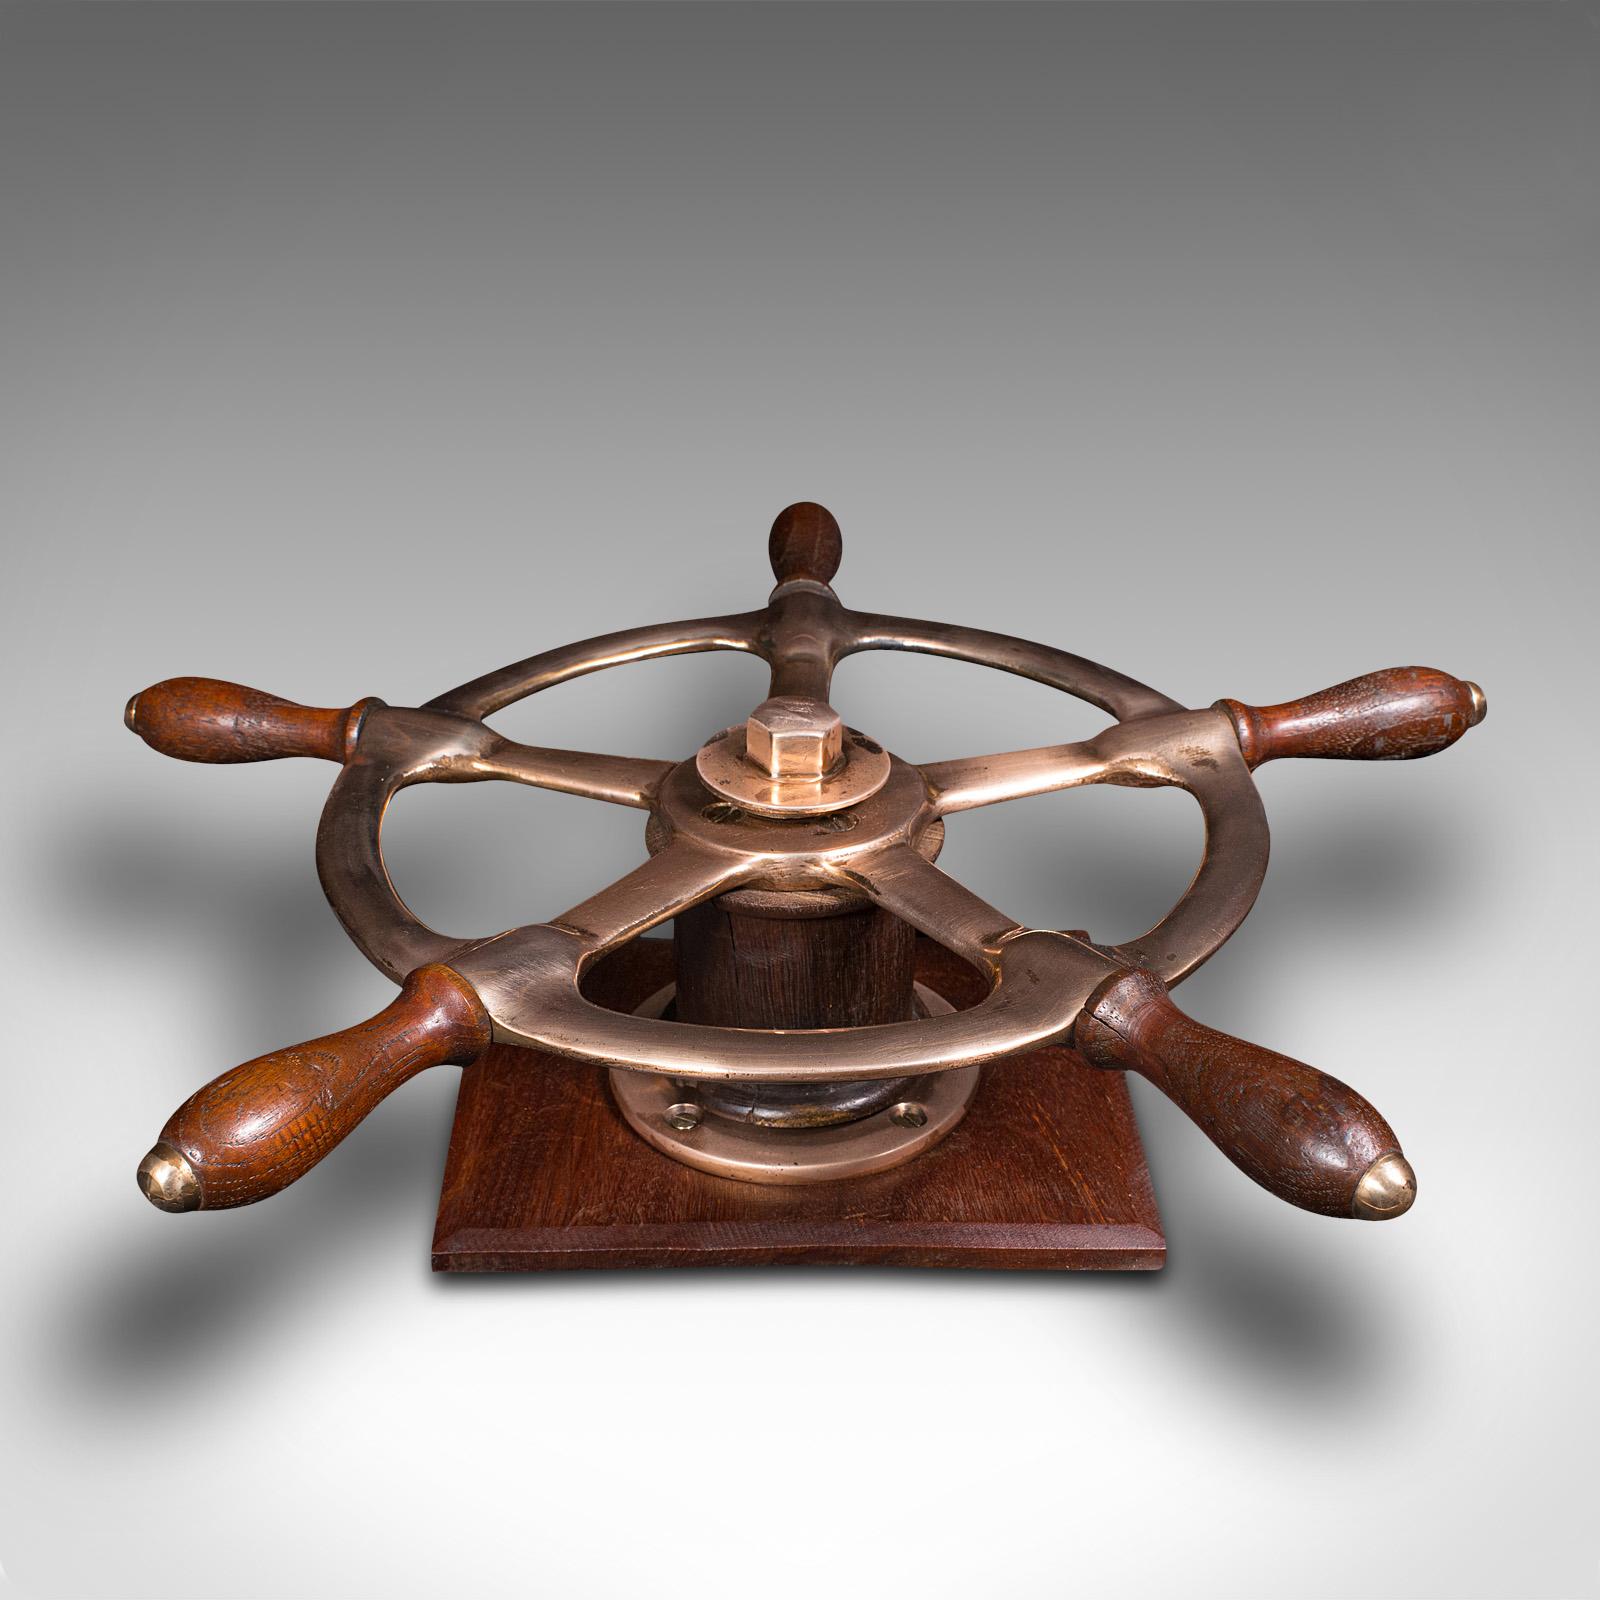 This is a mounted mid-century ship's wheel. An English, bronze and oak decorative maritime helm, dating to the mid-century.

Pleasingly presented wheel with nautical appeal
Displays a desirable aged patina and in good order
Eye-catchingly polished